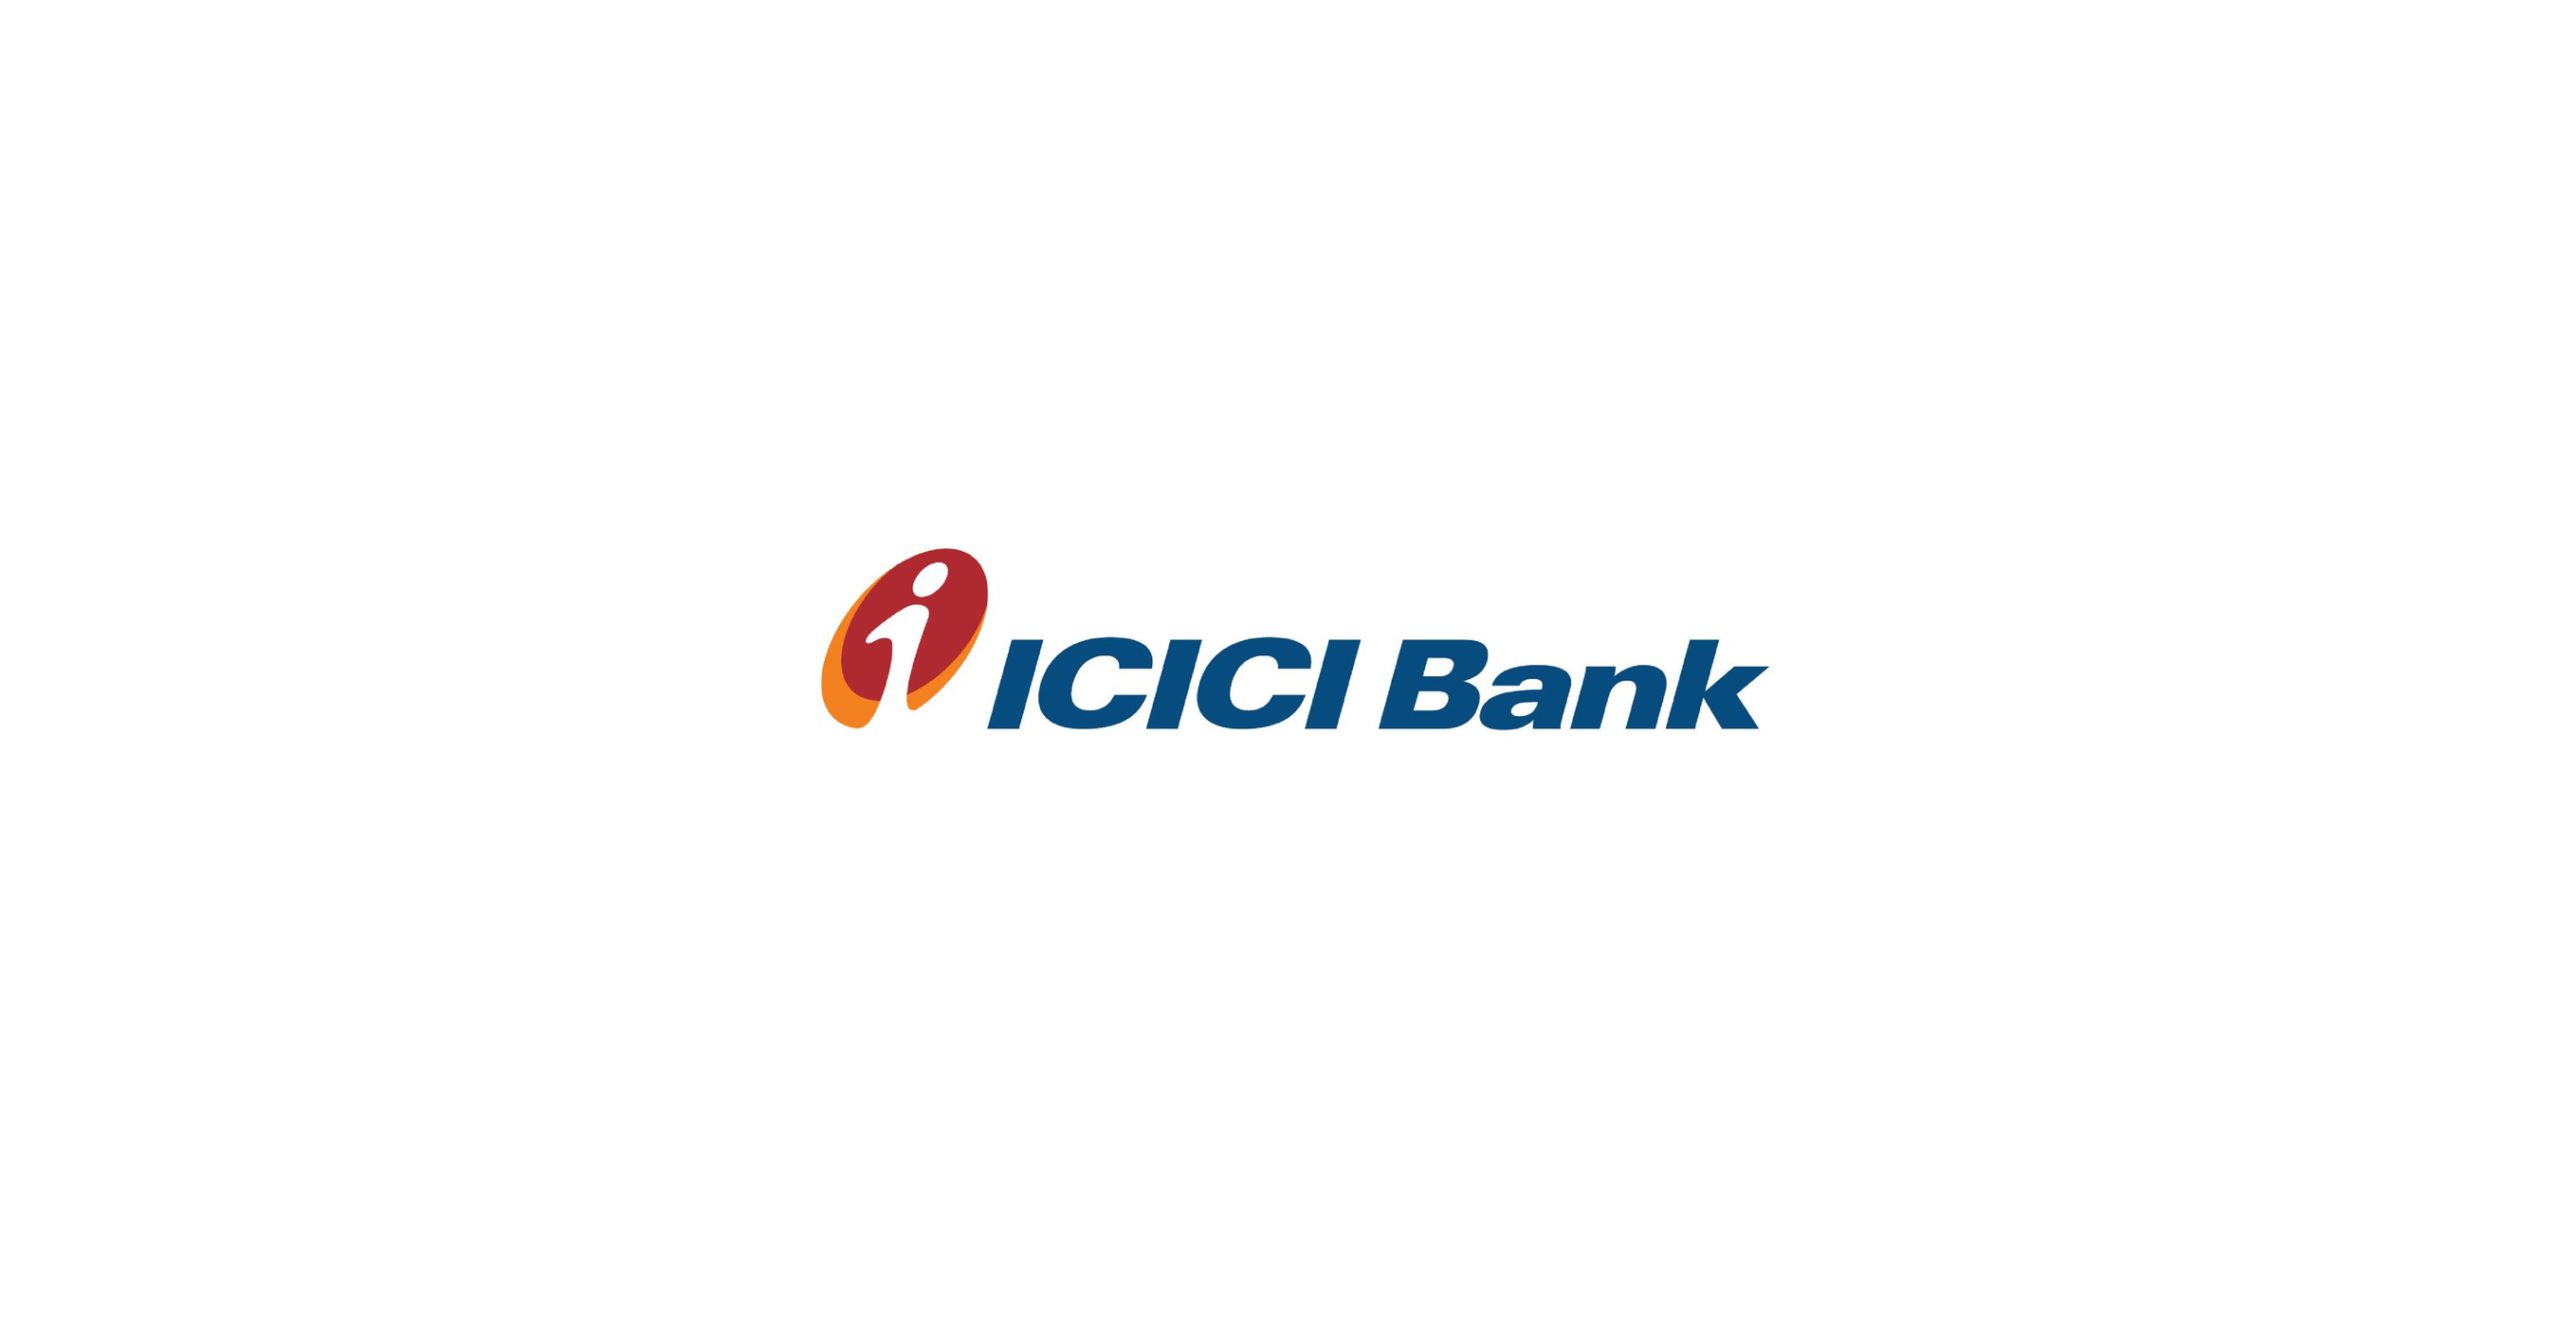 ICICI Bank Launches ‘Merchant Stack’ to Aid Digital and Contactless Banking Services